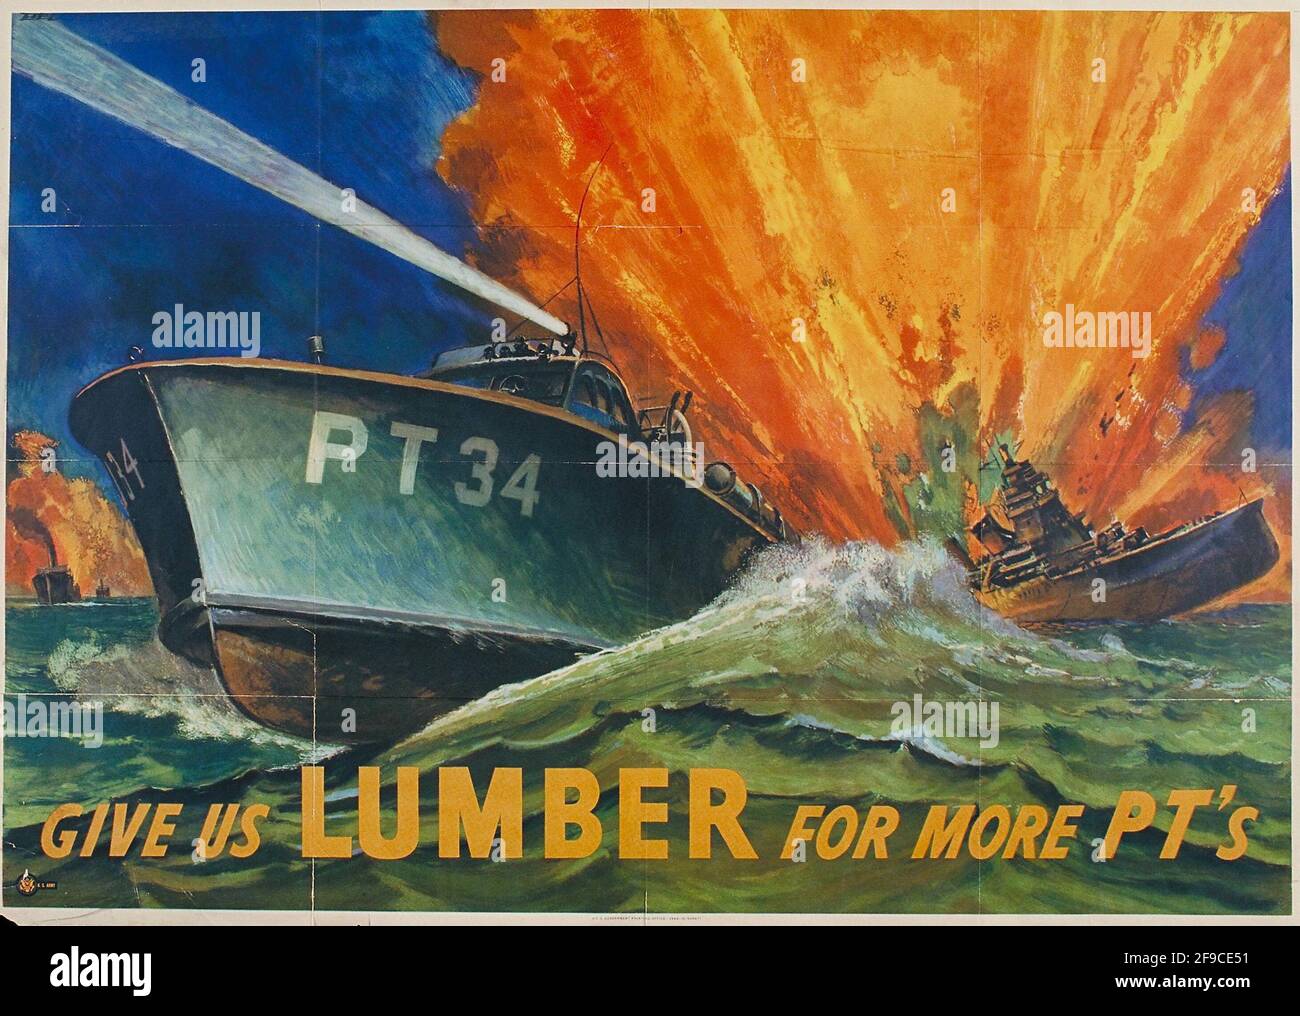 An American WW2 poster about increasing lumber production in the war effort Stock Photo